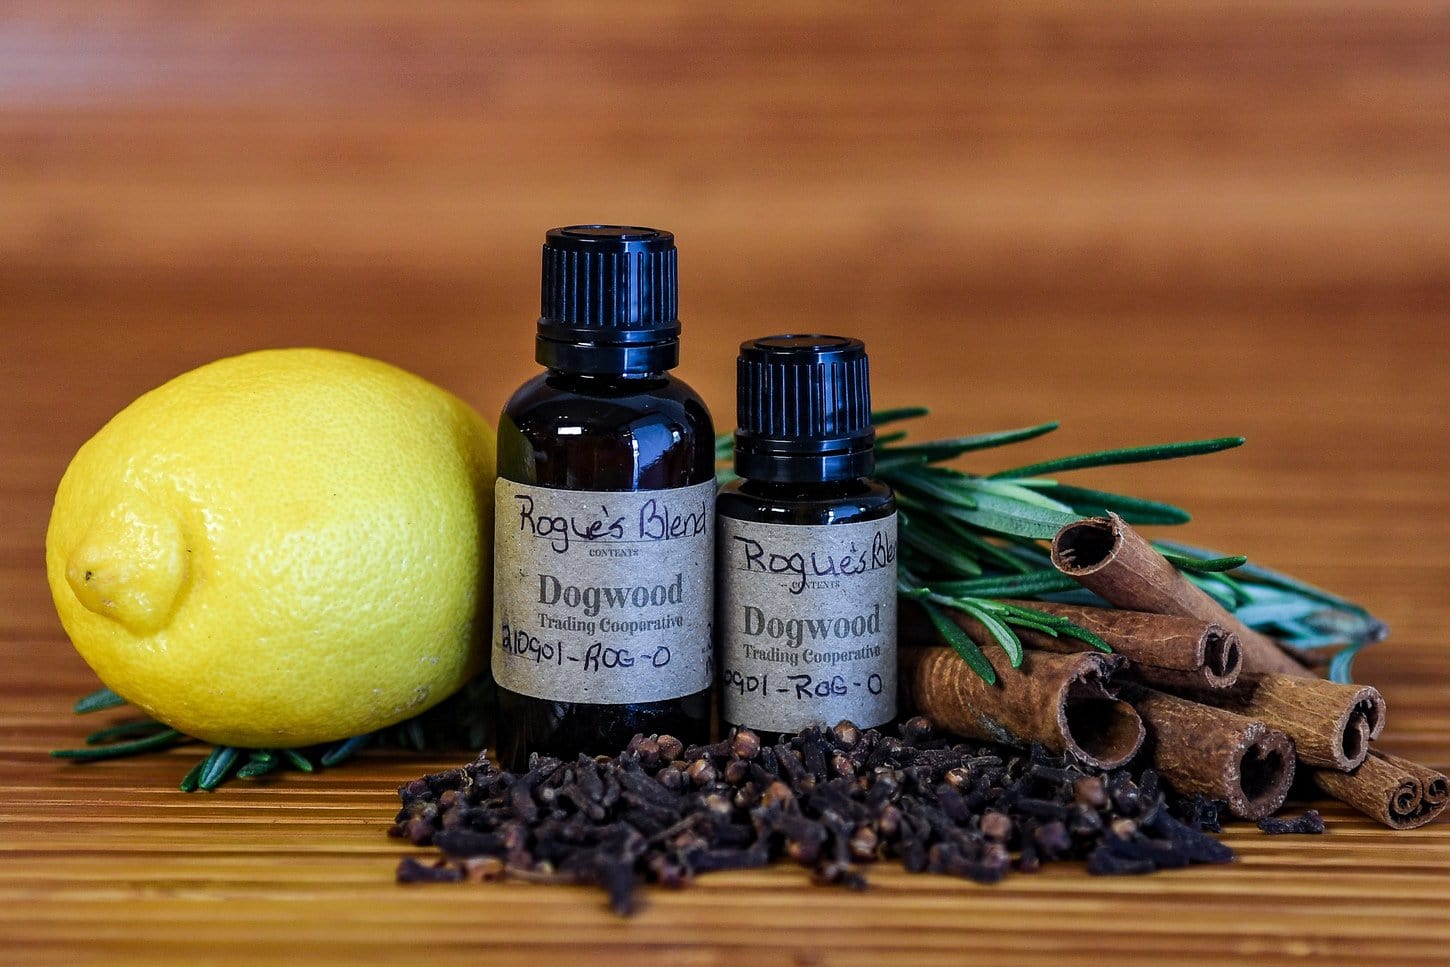 Rogue's Blend (Thief Oil) - Retail - The Dogwood Trading Cooperative